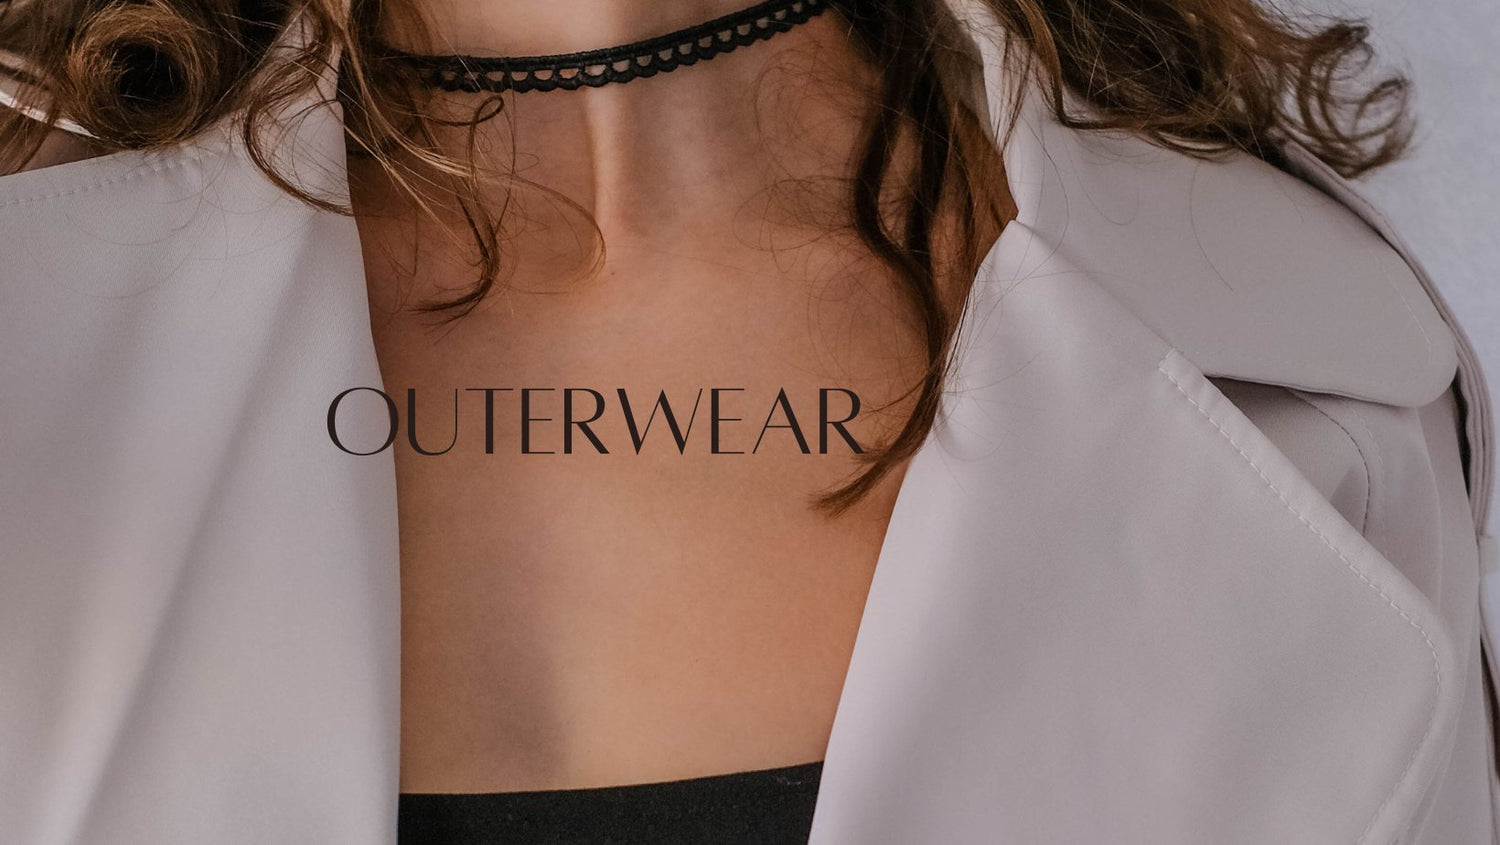 Outerwear - the friday collective